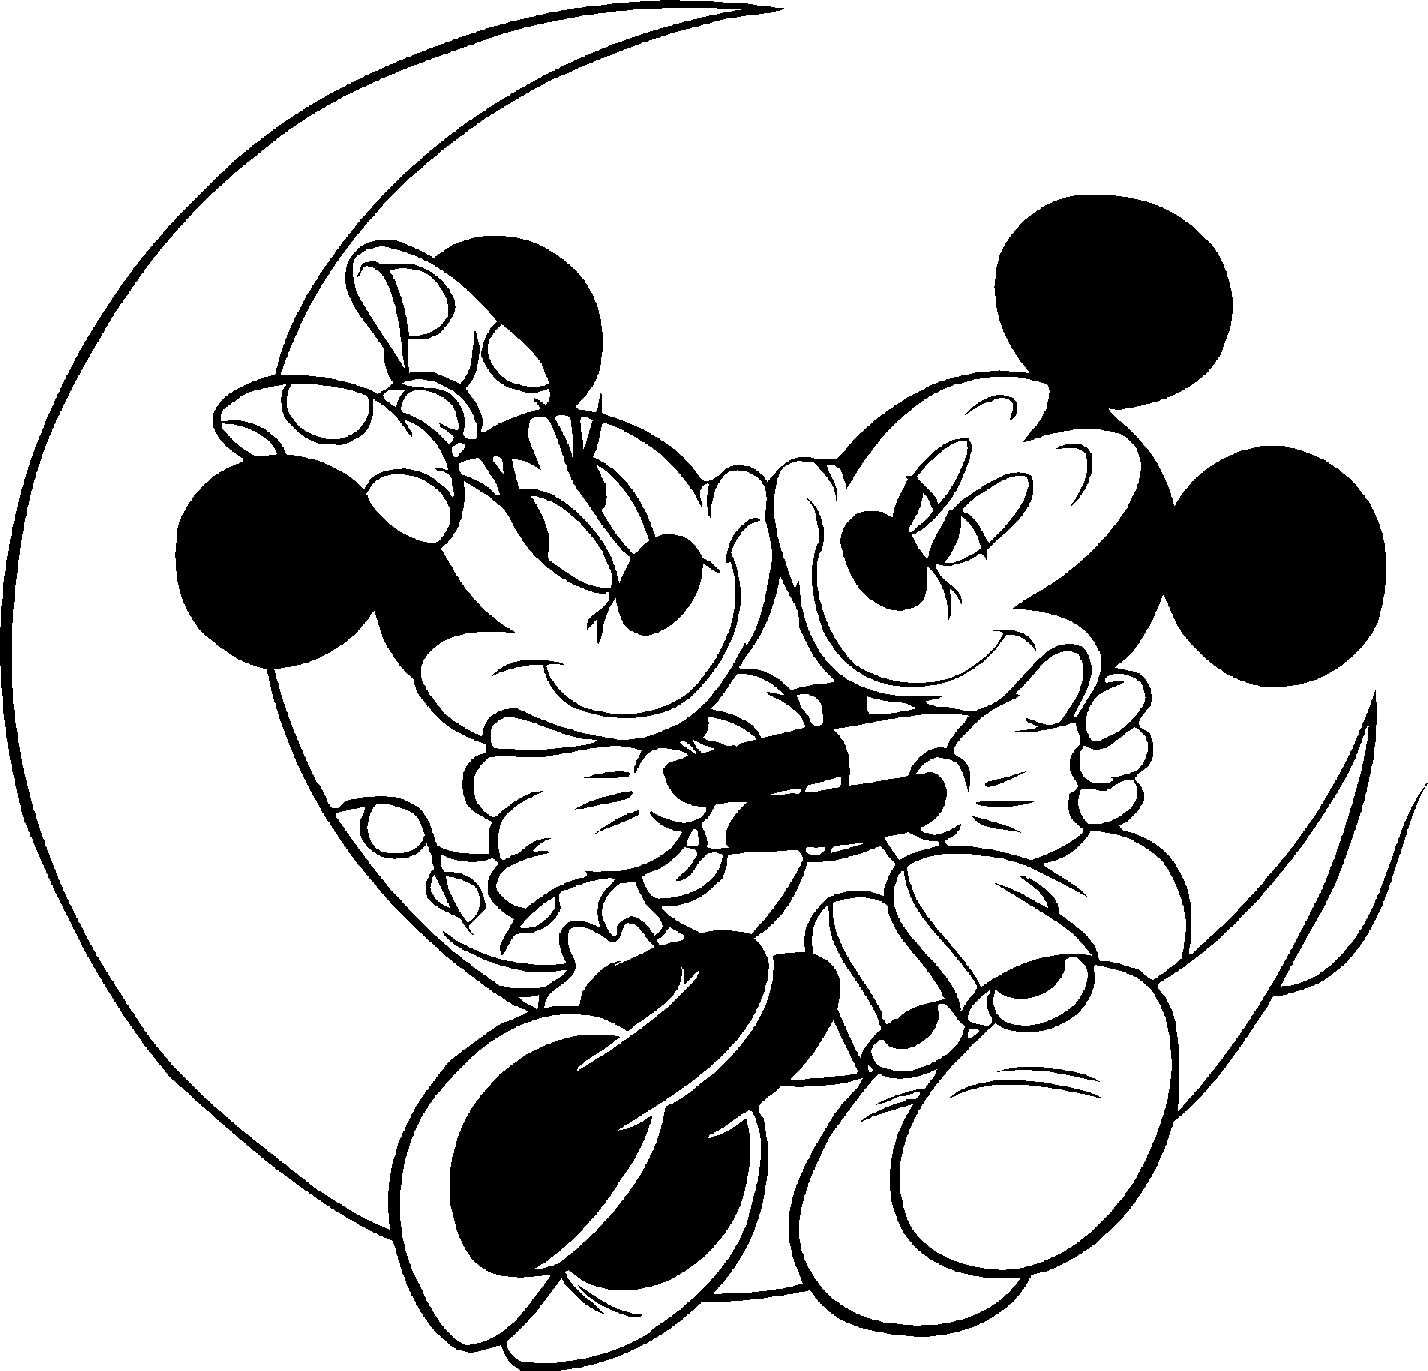 Cartoon Coloring Pages (5) Coloring Kids - Coloring Kids